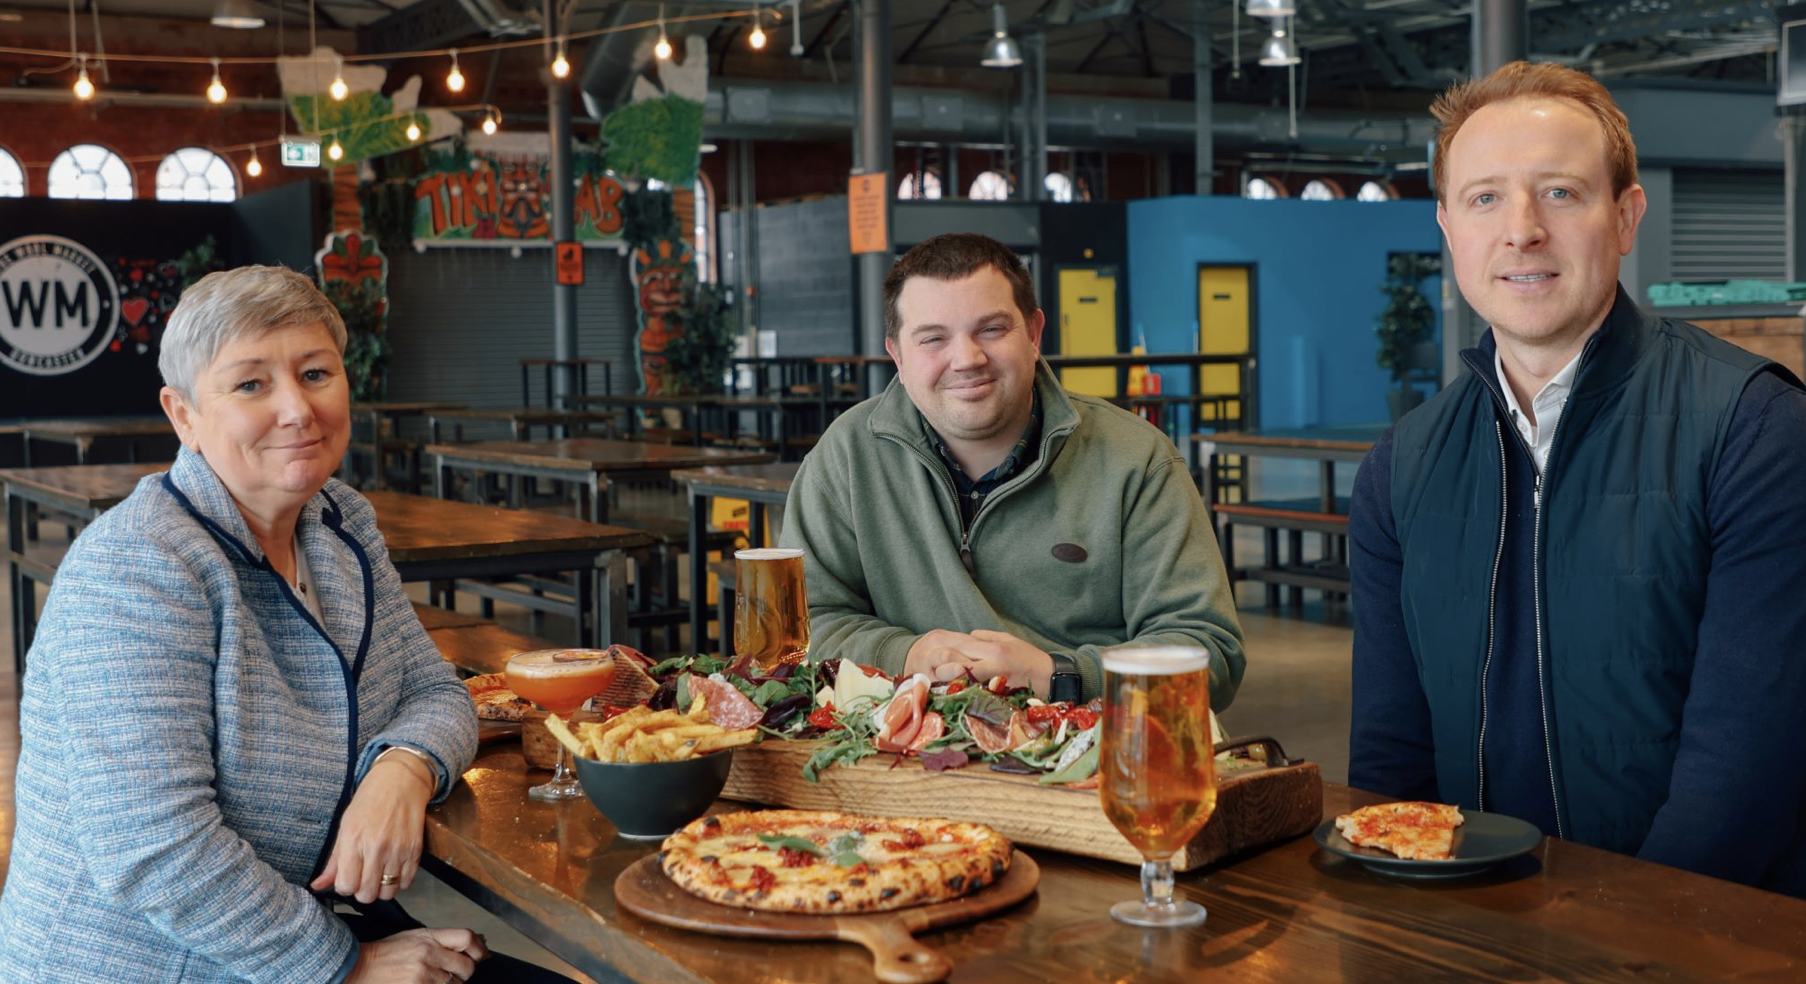 Forge Island sold out following The Rustic Pizza Co deal